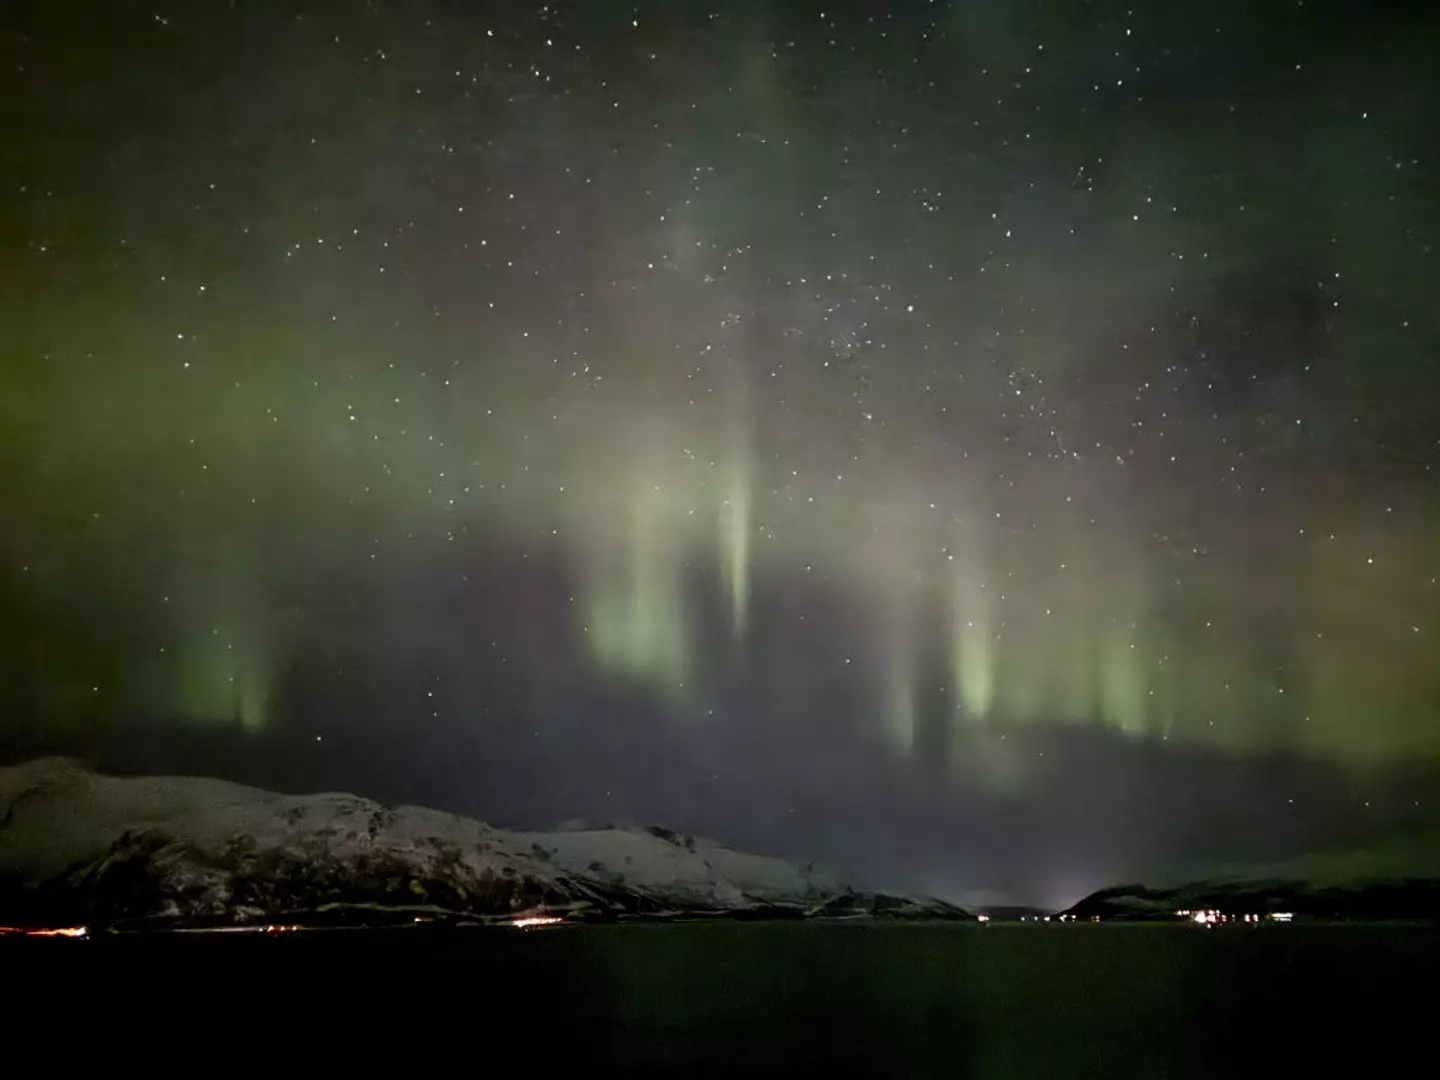 People have been left terrified after hearing the noise of Aurora Borealis.